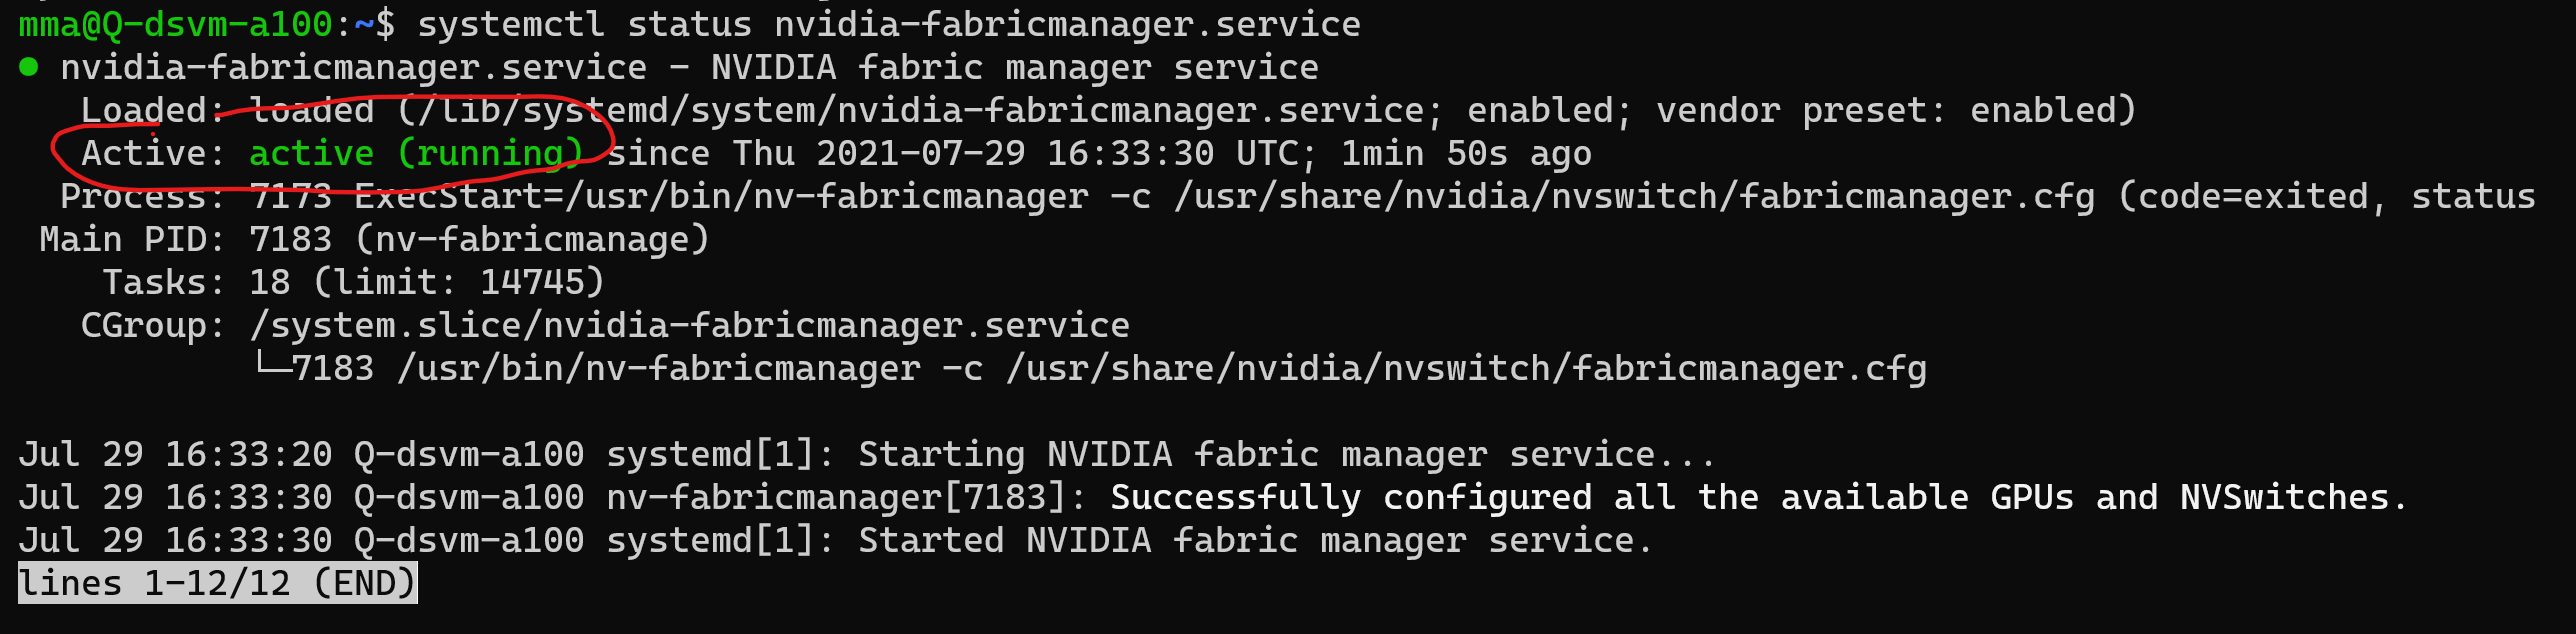 Screenshot showing the Fabric Manager service running.